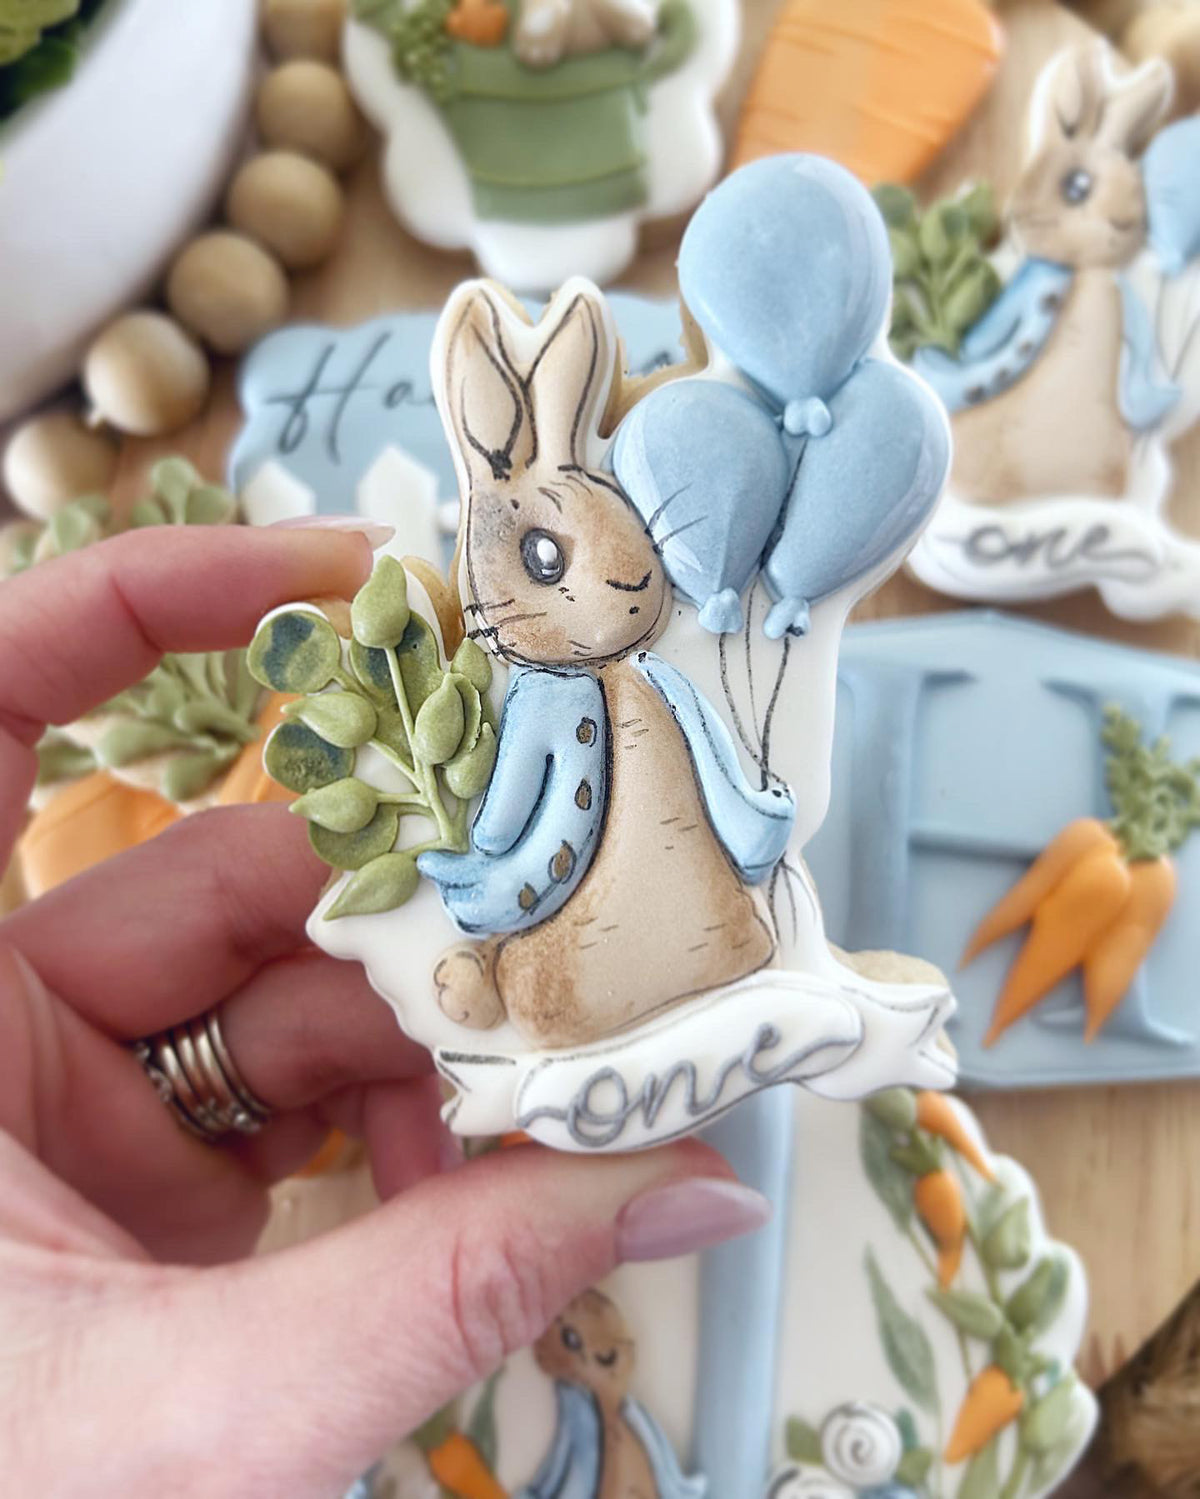 Rabbit with Balloons Plaque Cookie Cutter by MinnieCakes